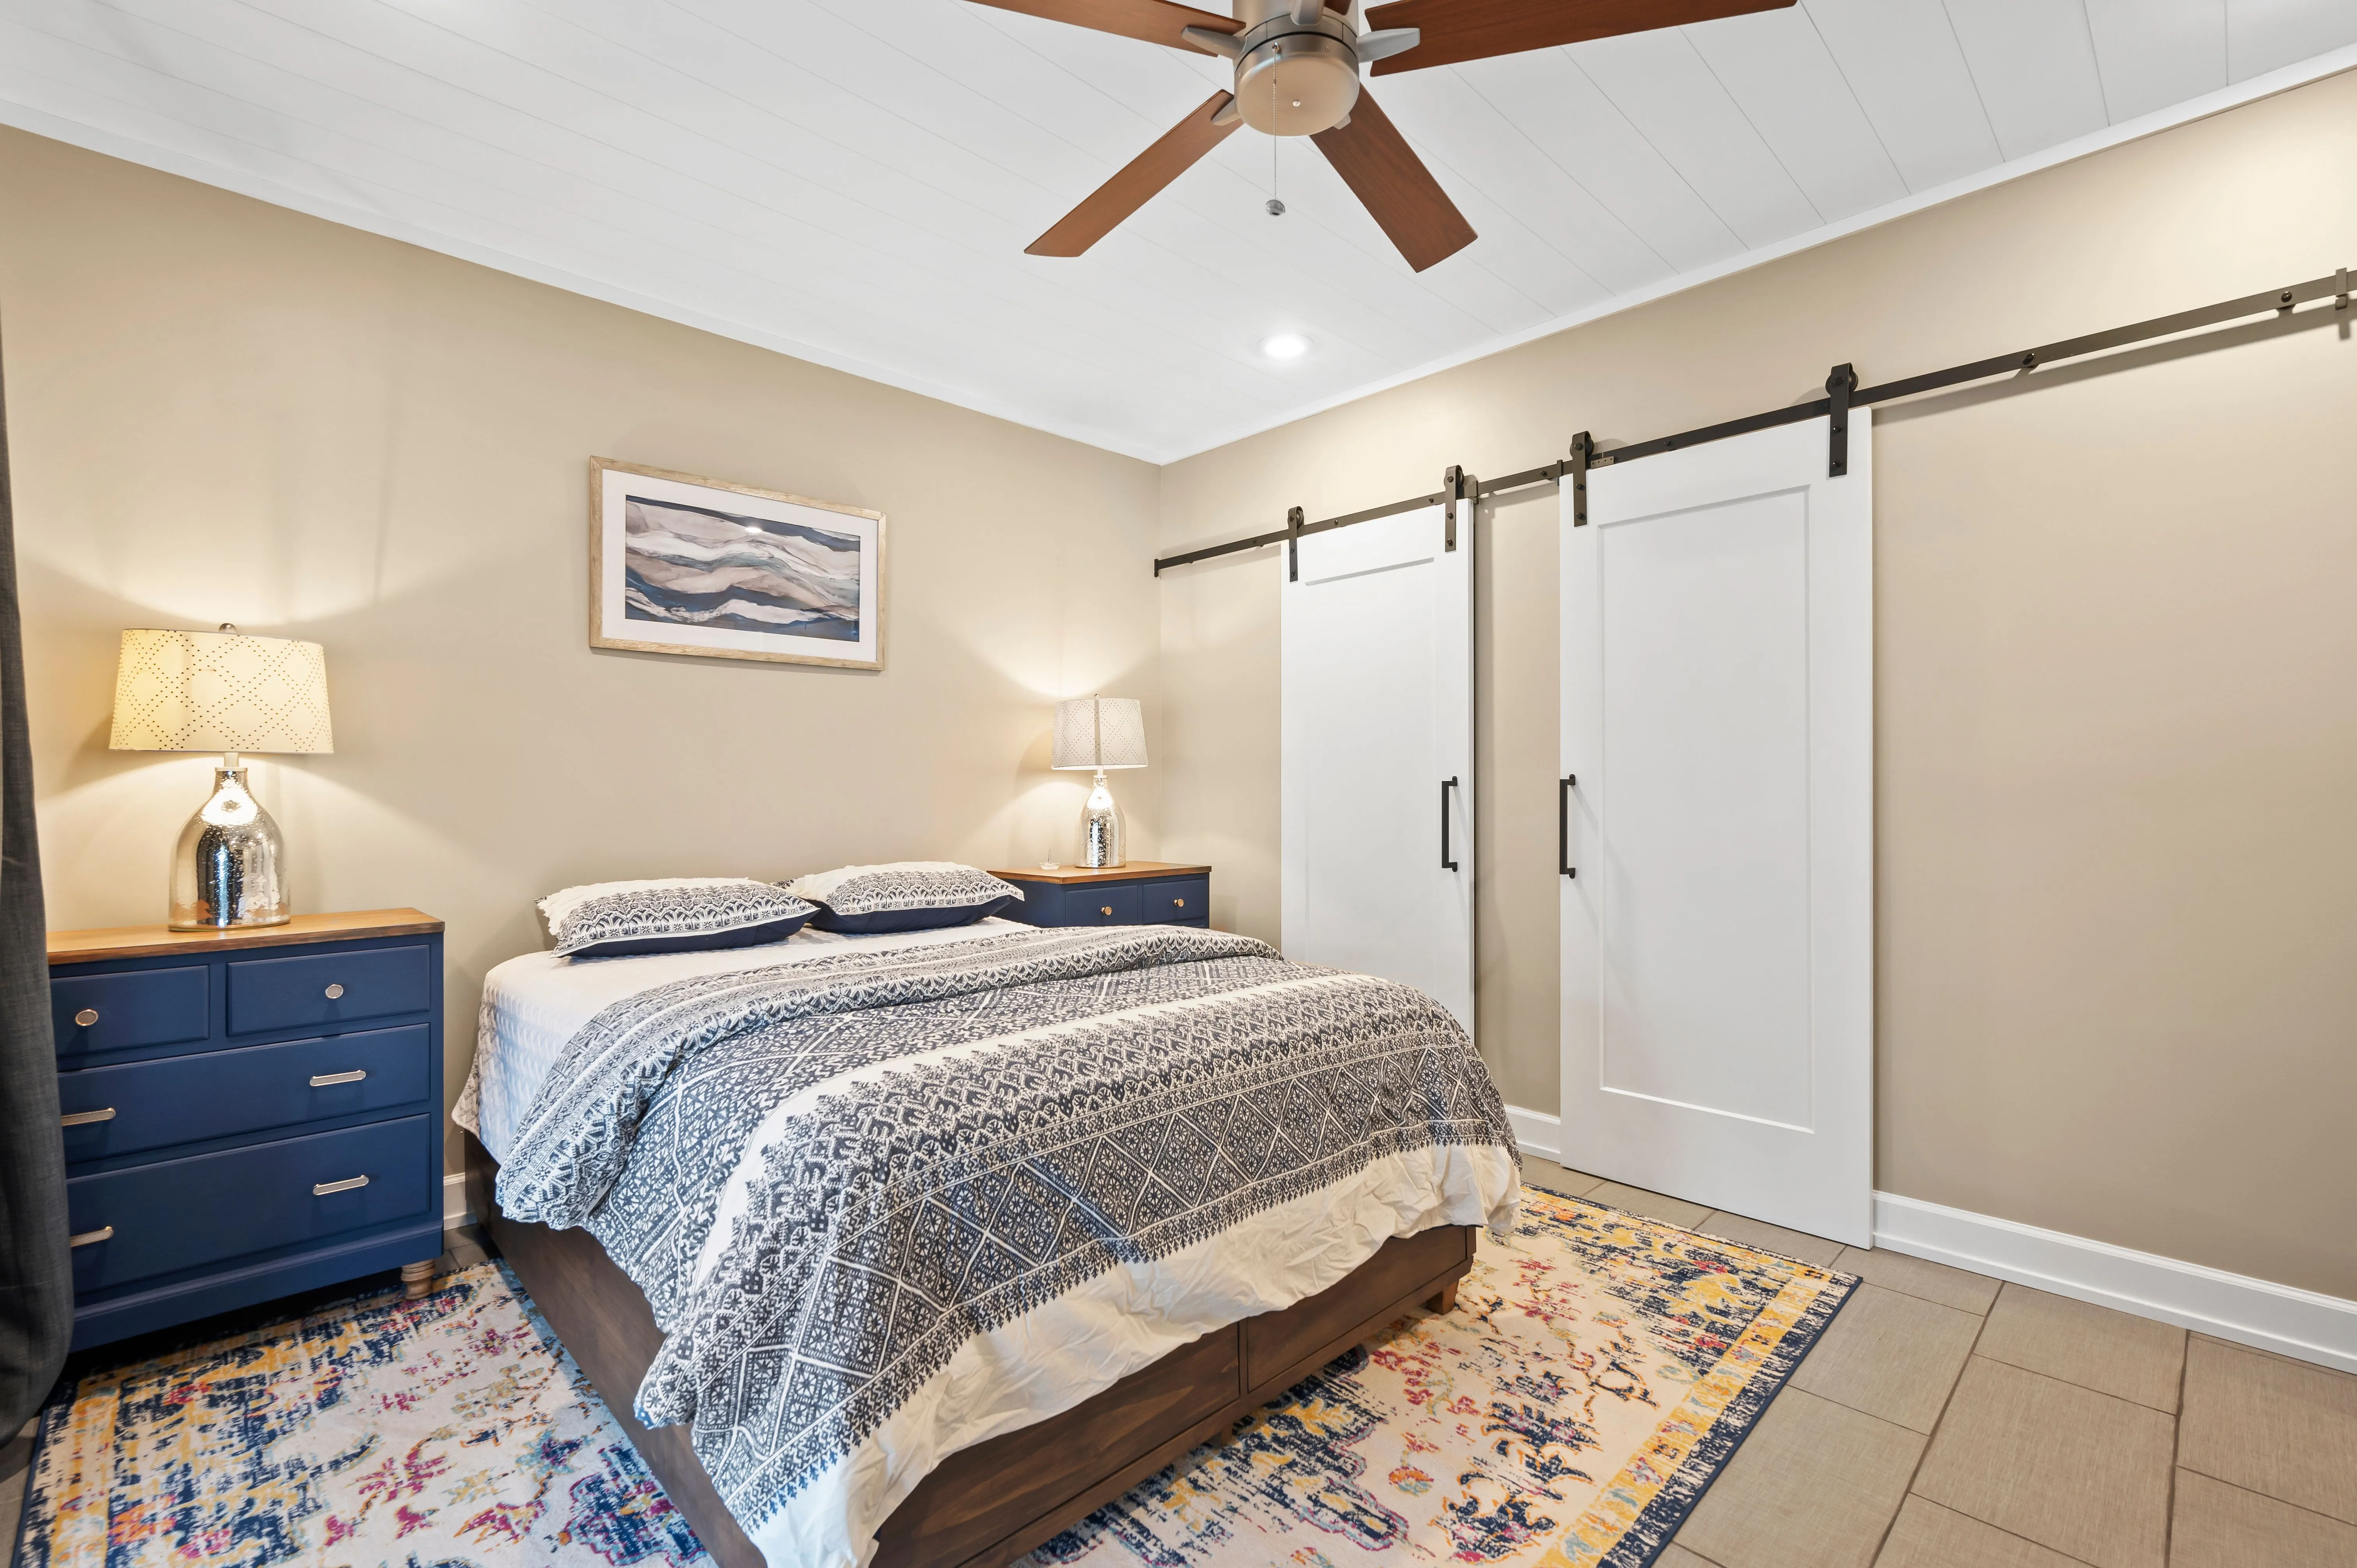 Cozy bedroom interior with a queen-size bed, patterned bedding, a ceiling fan, sliding closet doors, and a nightstand with a lamp.